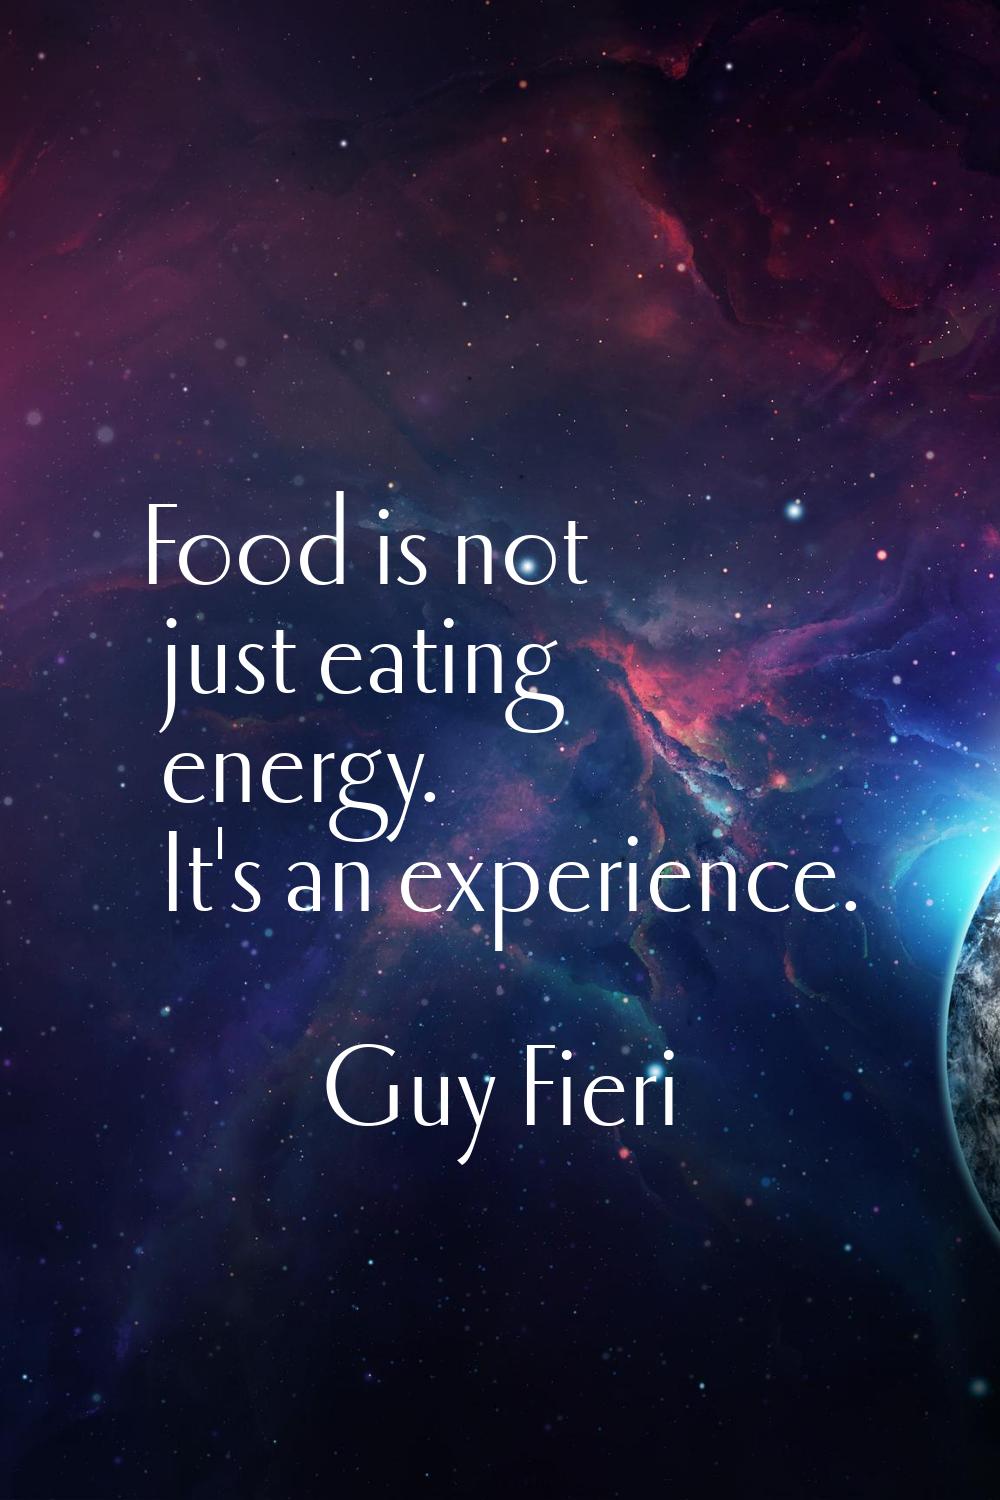 Food is not just eating energy. It's an experience.